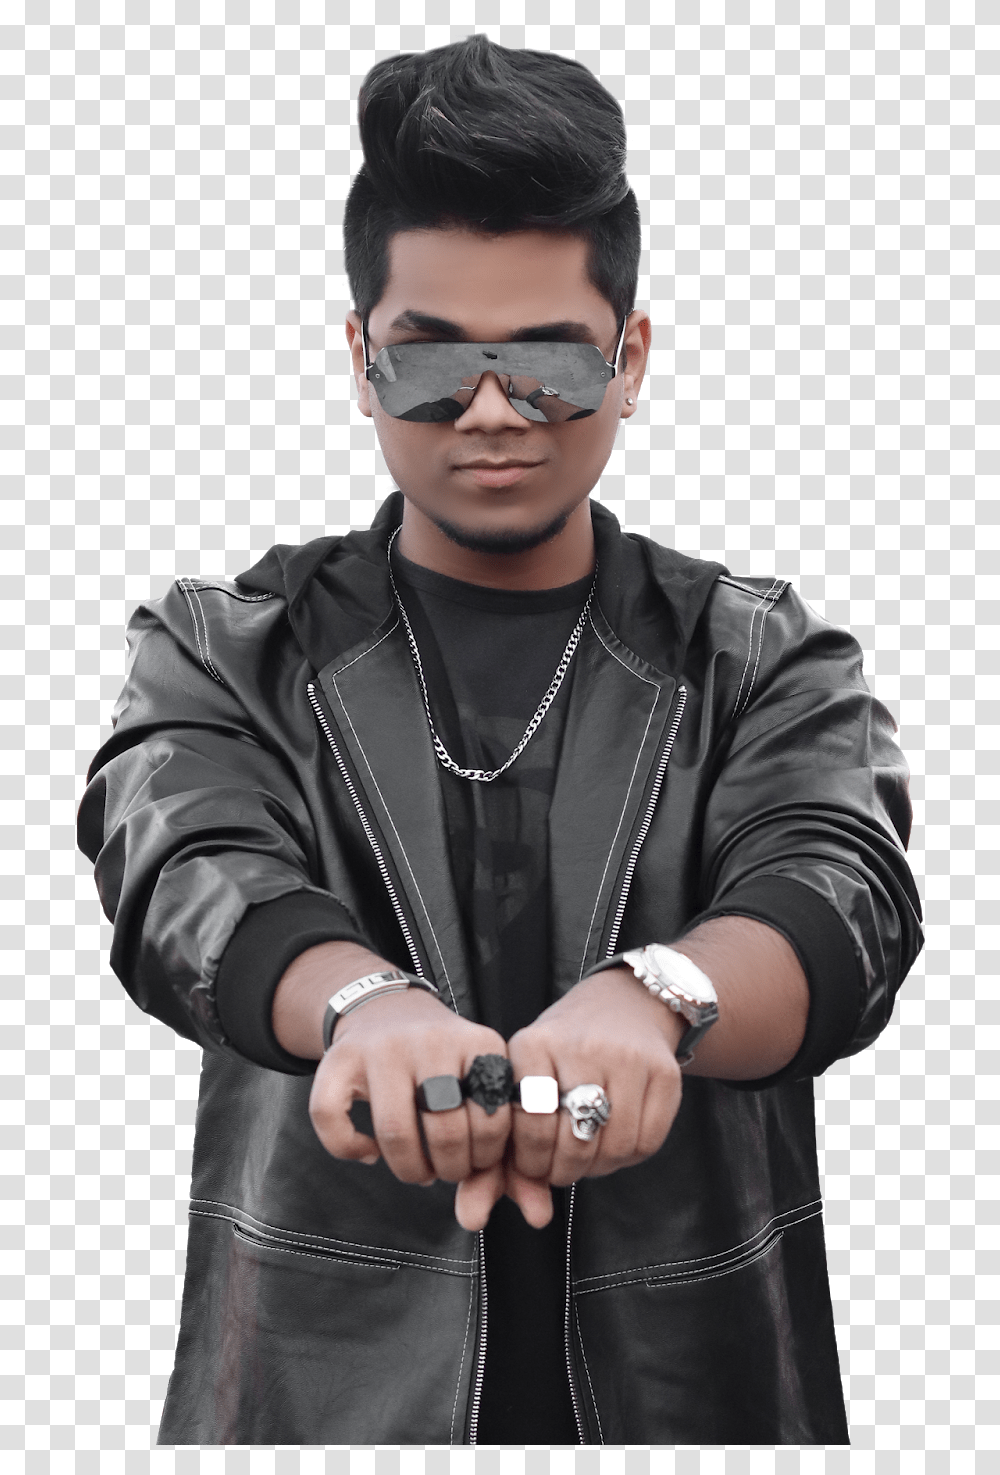 Smoke Ring Light Photo Editing Ring Light Ke Background, Person, Human, Sunglasses, Accessories Transparent Png